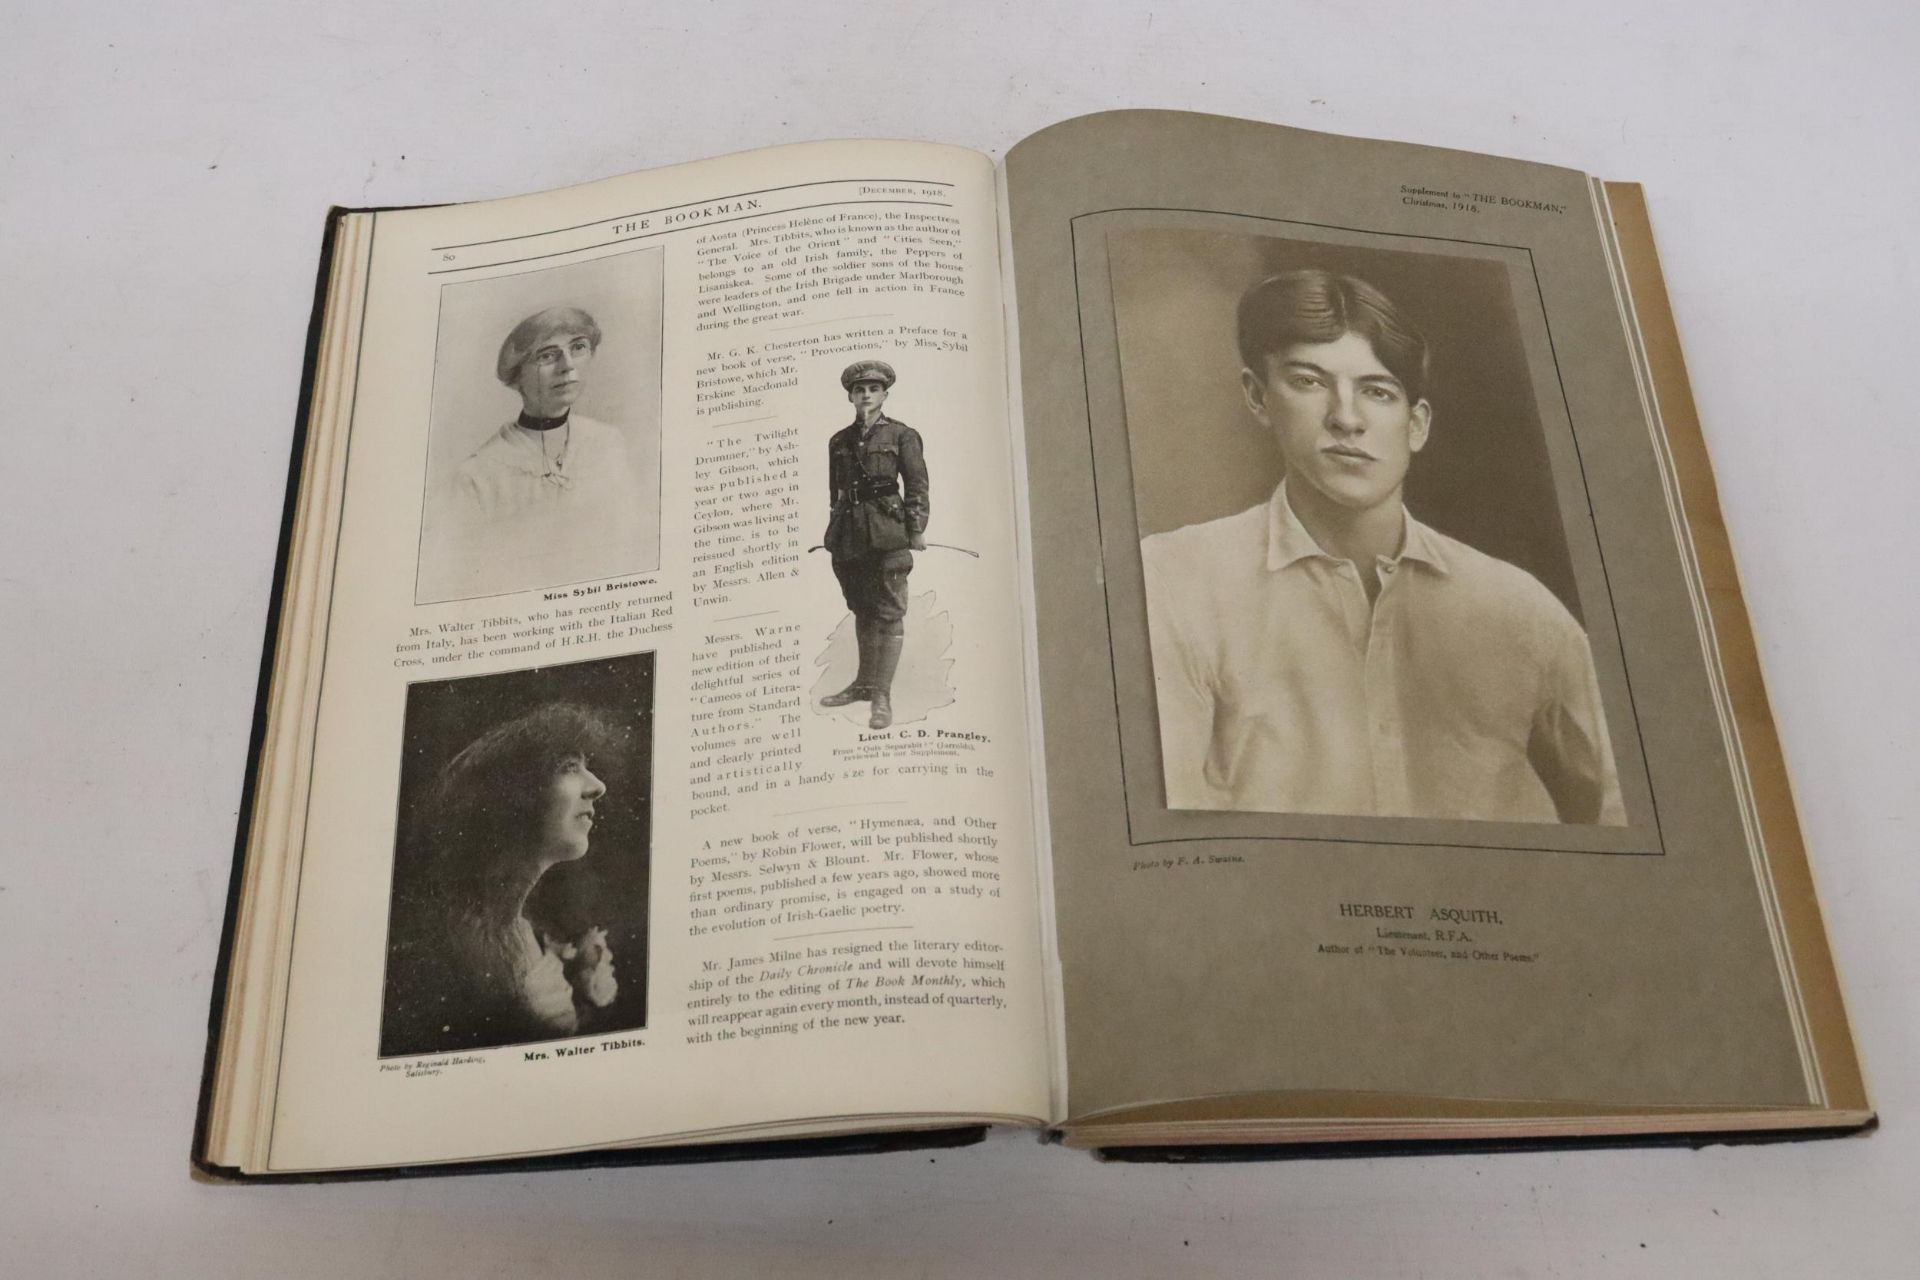 TWO LARGE VOLUMES OF "THE BOOKMAN" 1913-1914 AND 1918-1919 - Image 3 of 8